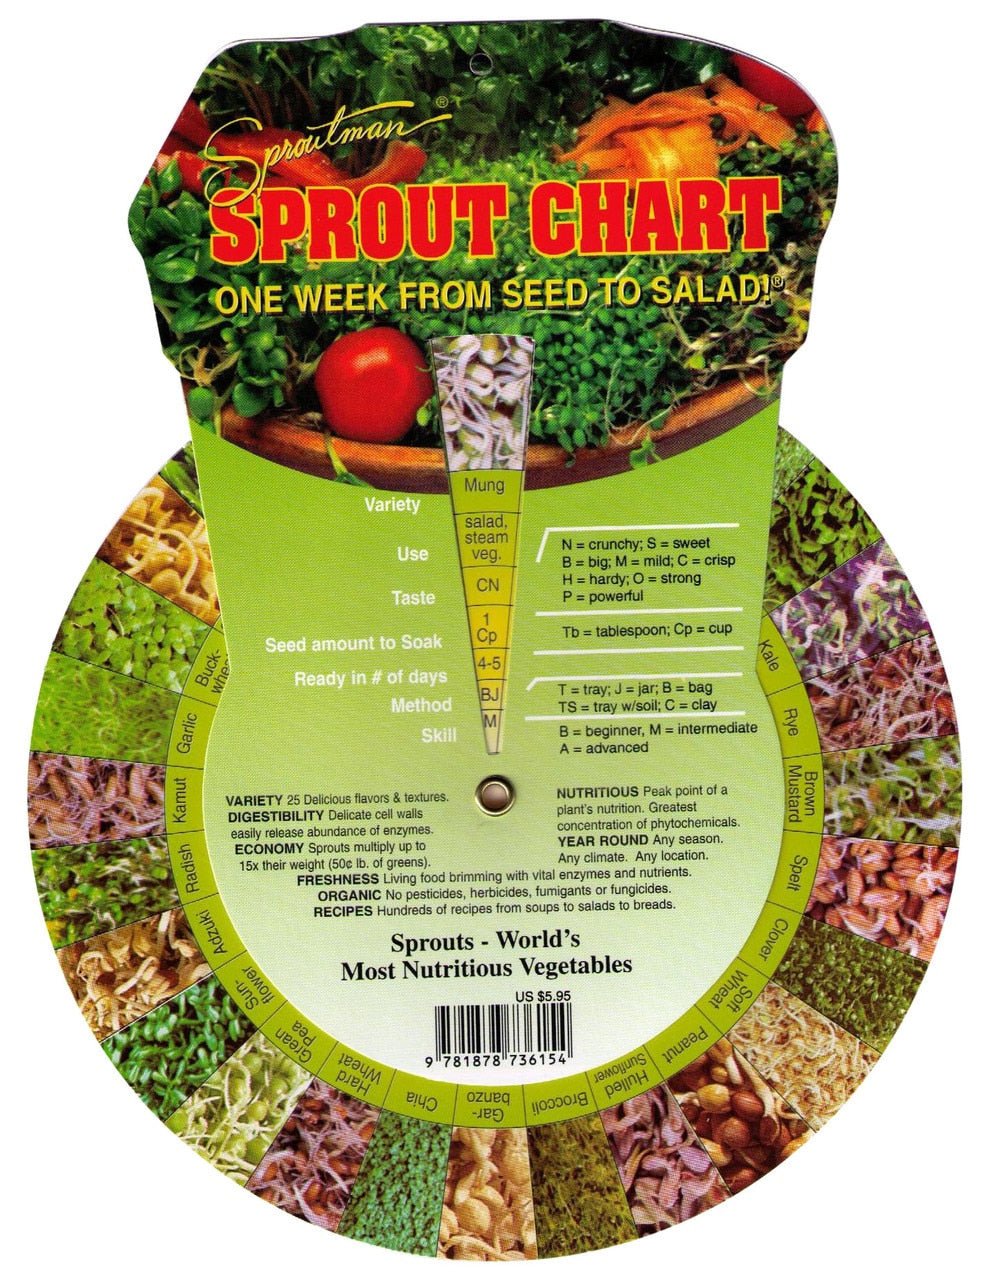 Sproutman®'s "Turn-the-Dial" Sprout Chart - Sproutman